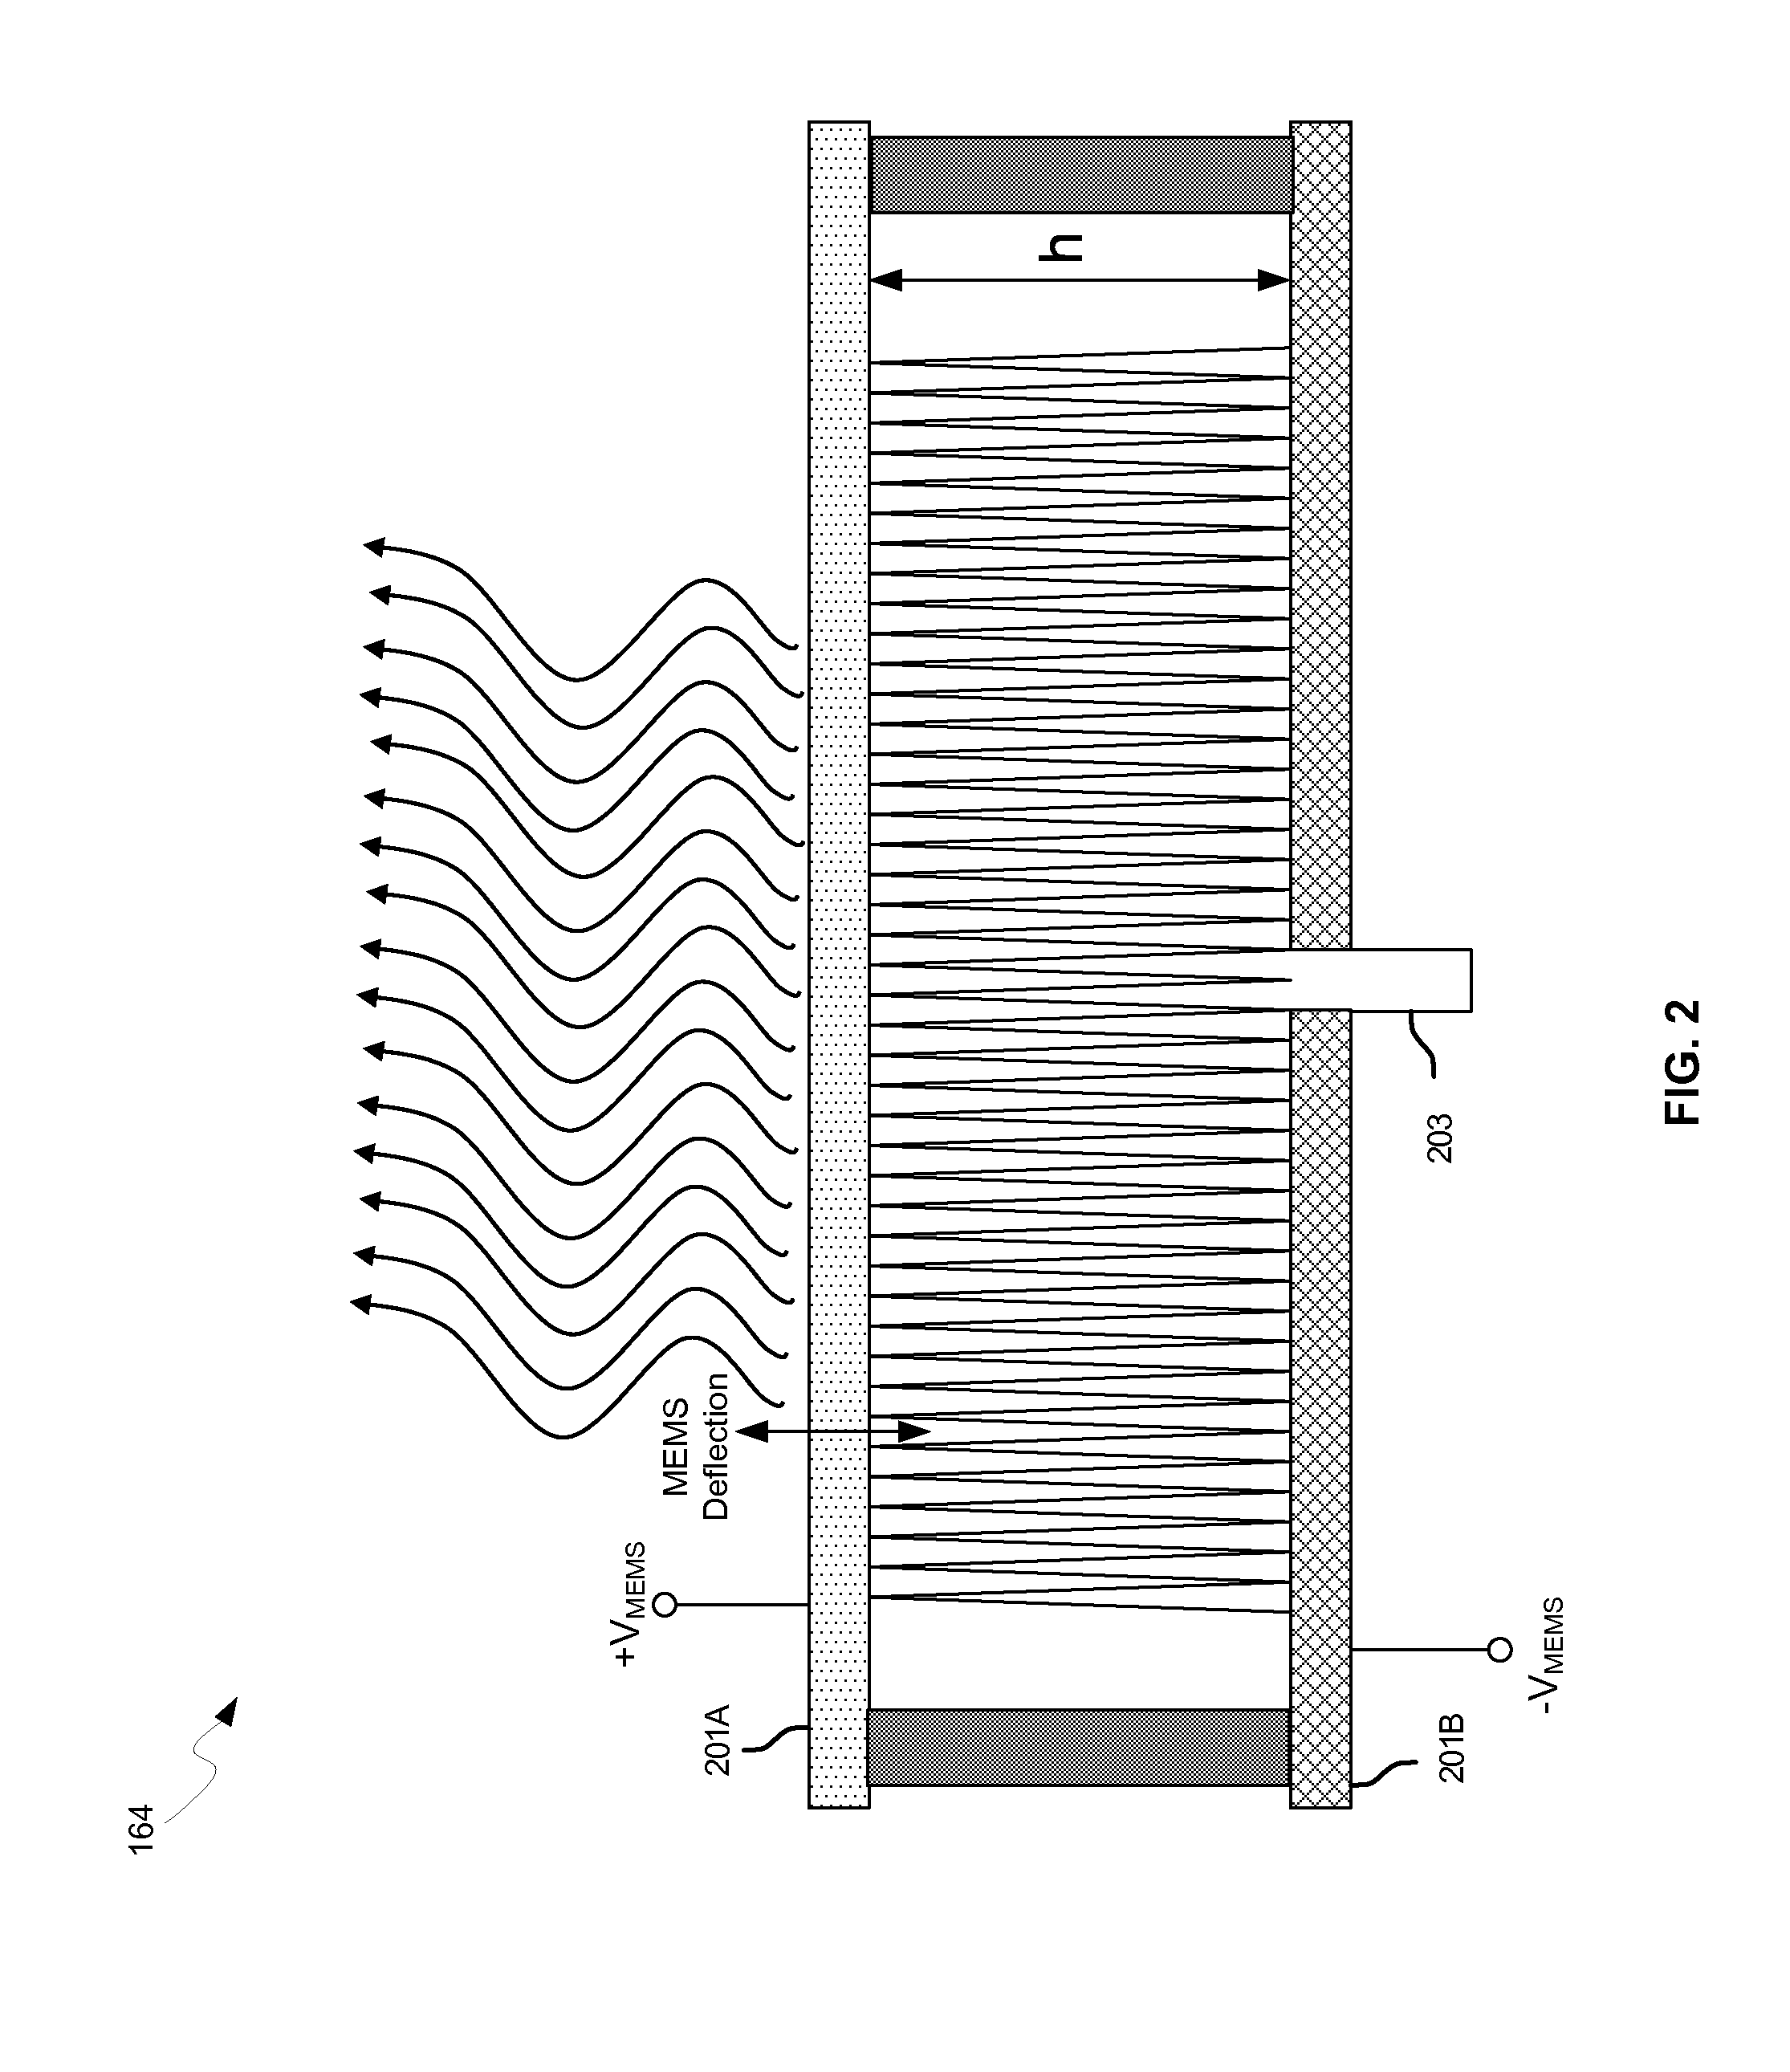 Method and system for a leaky wave antenna on an integrated circuit package